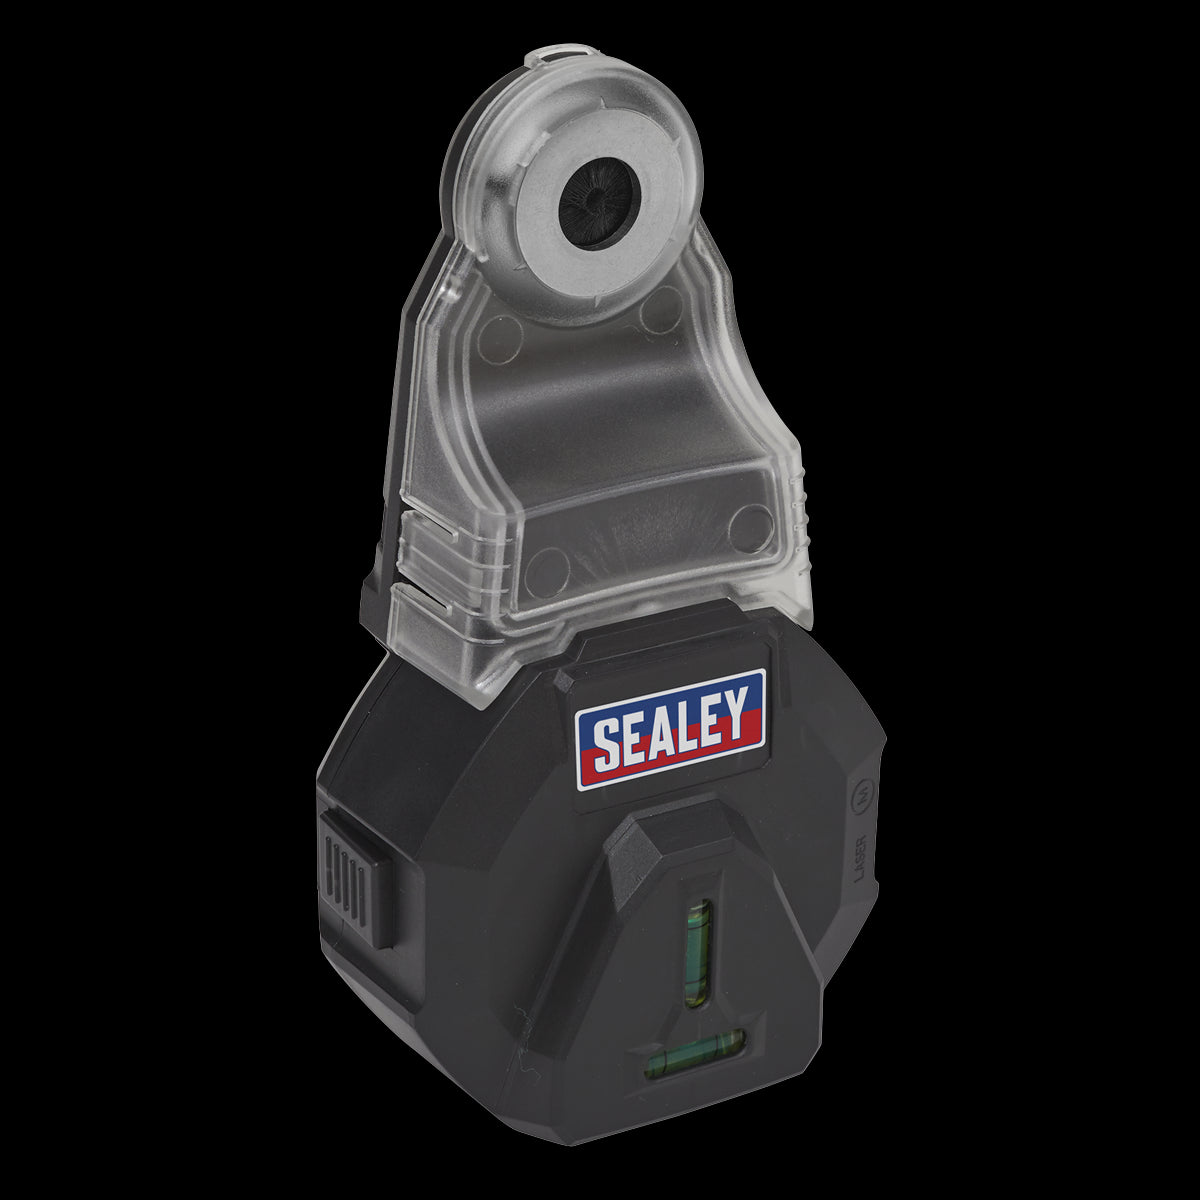 Sealey Vacuum Drill Dust Extractor 3.7V with Spirit Level and Laser Light